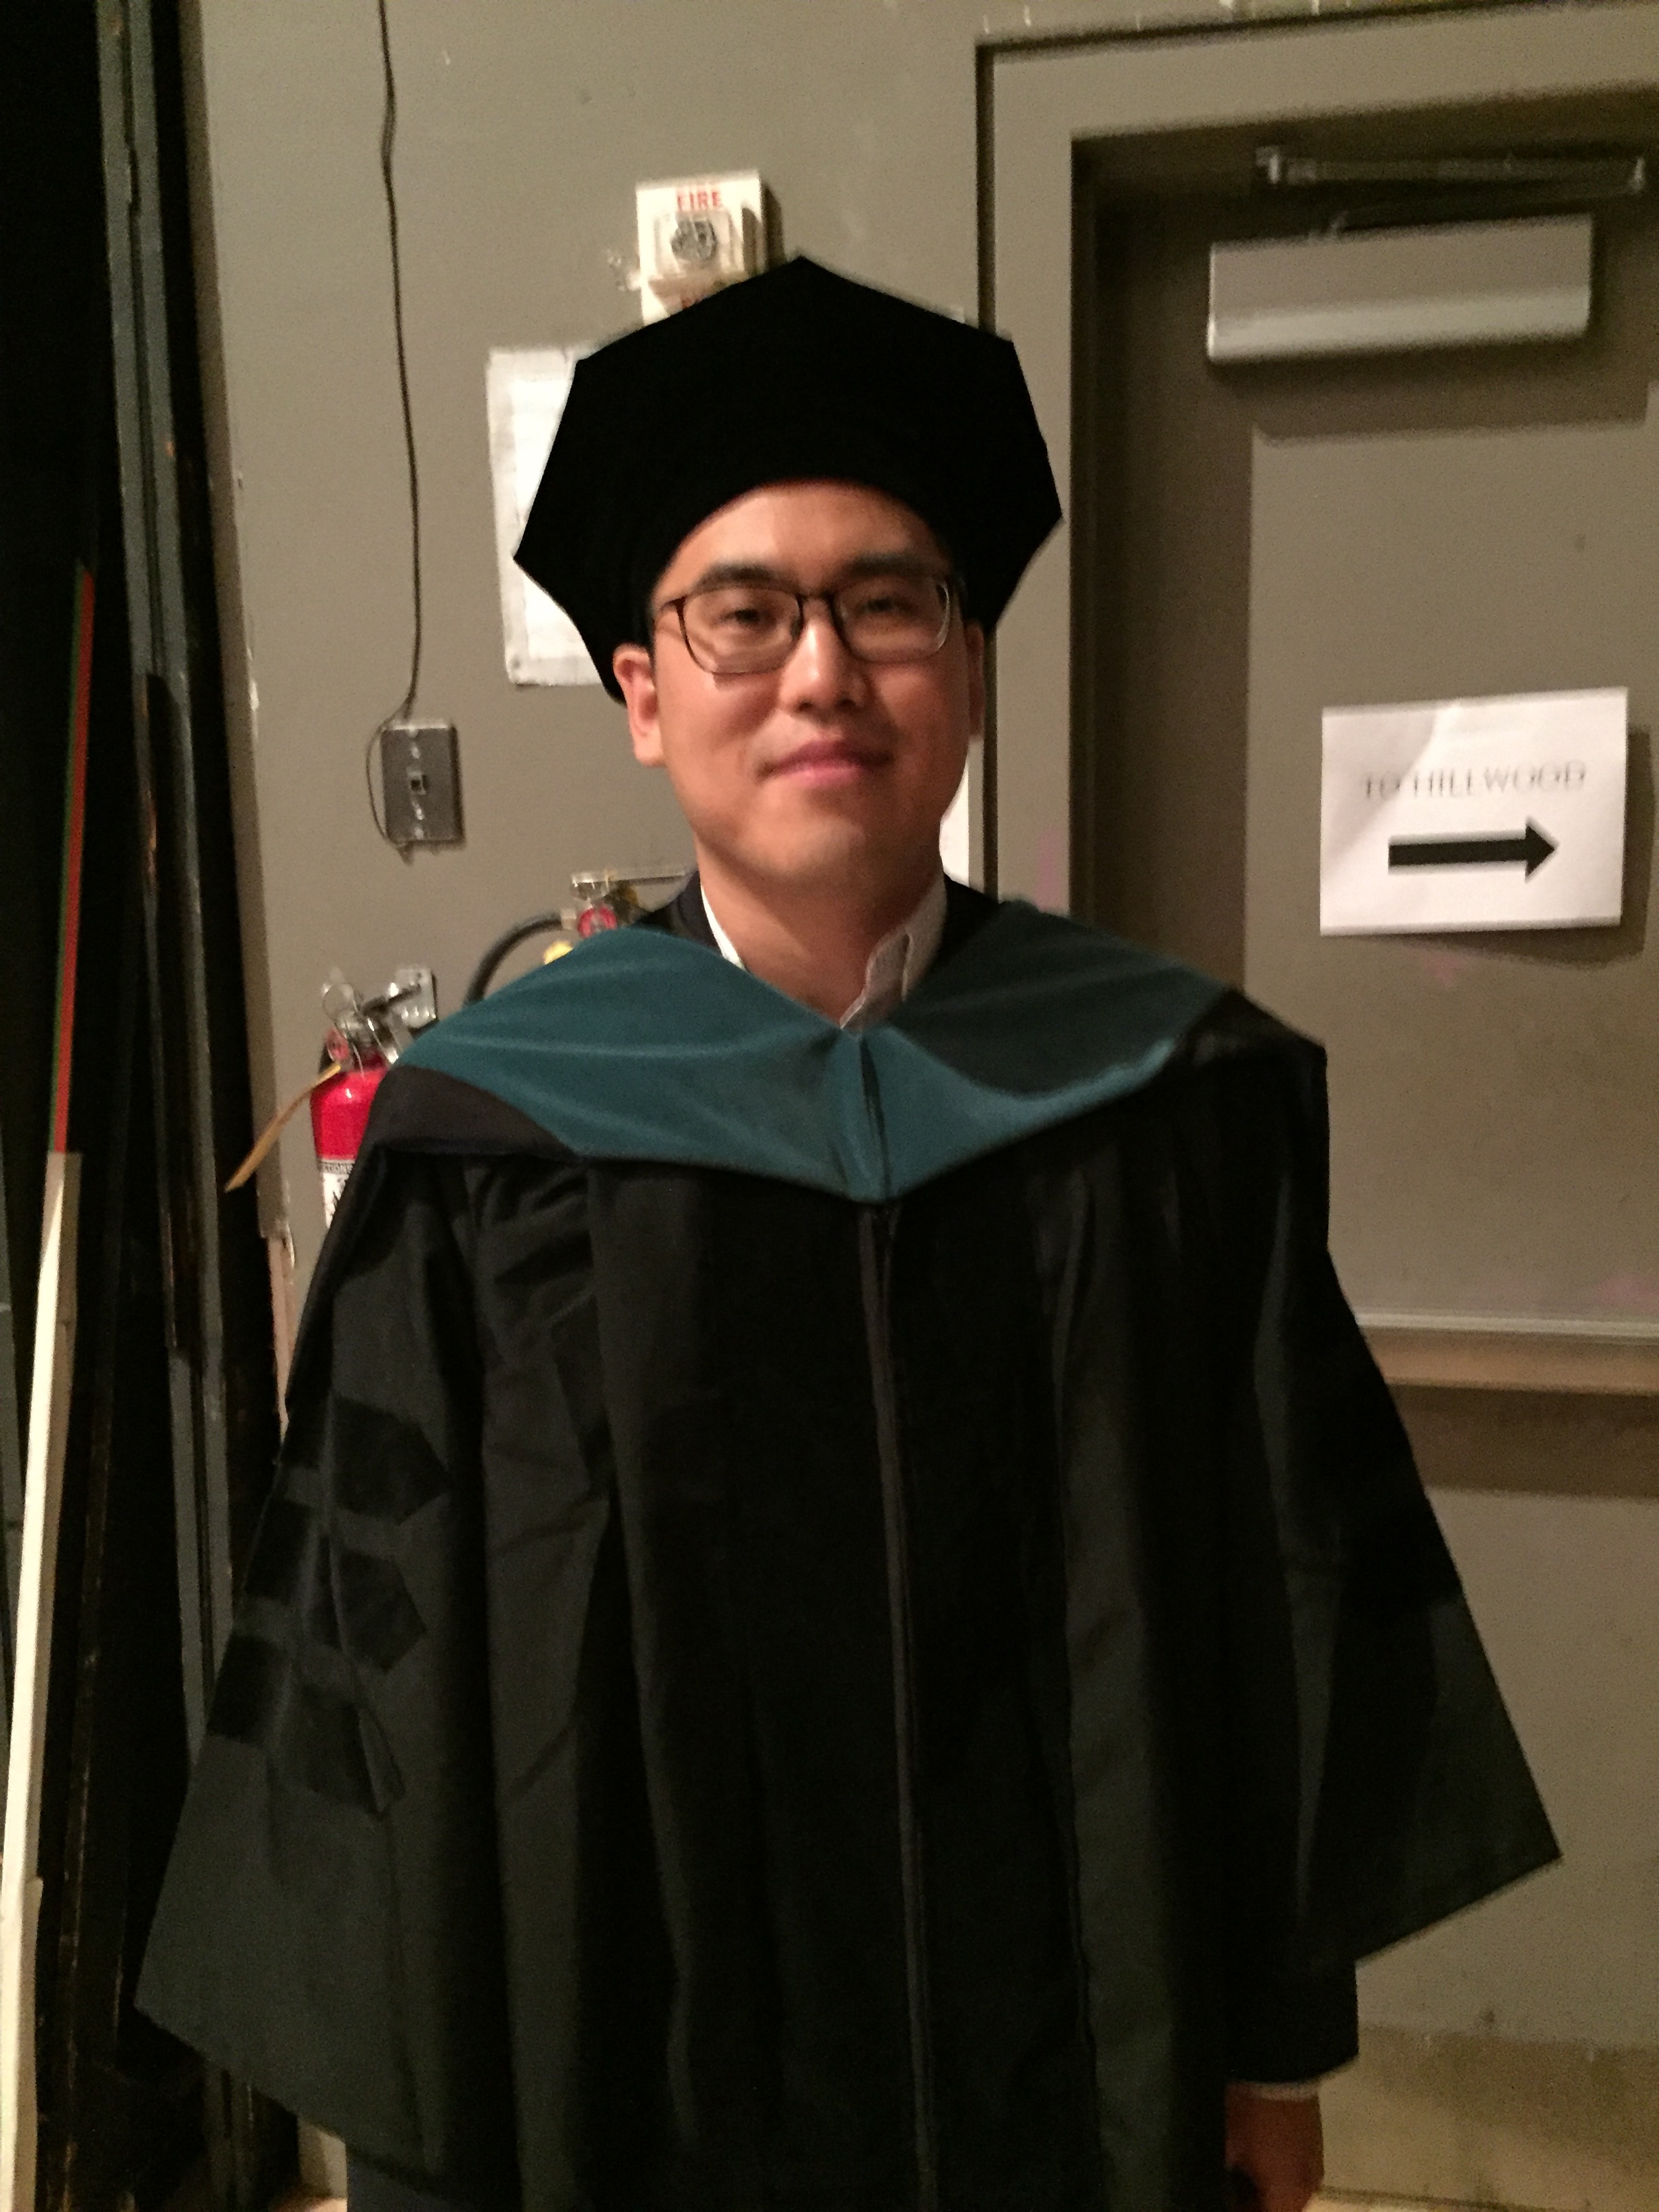 Joshua Park, class of 2016, graduate of the School of Health Sciences Doctor of Physical Therapy Program